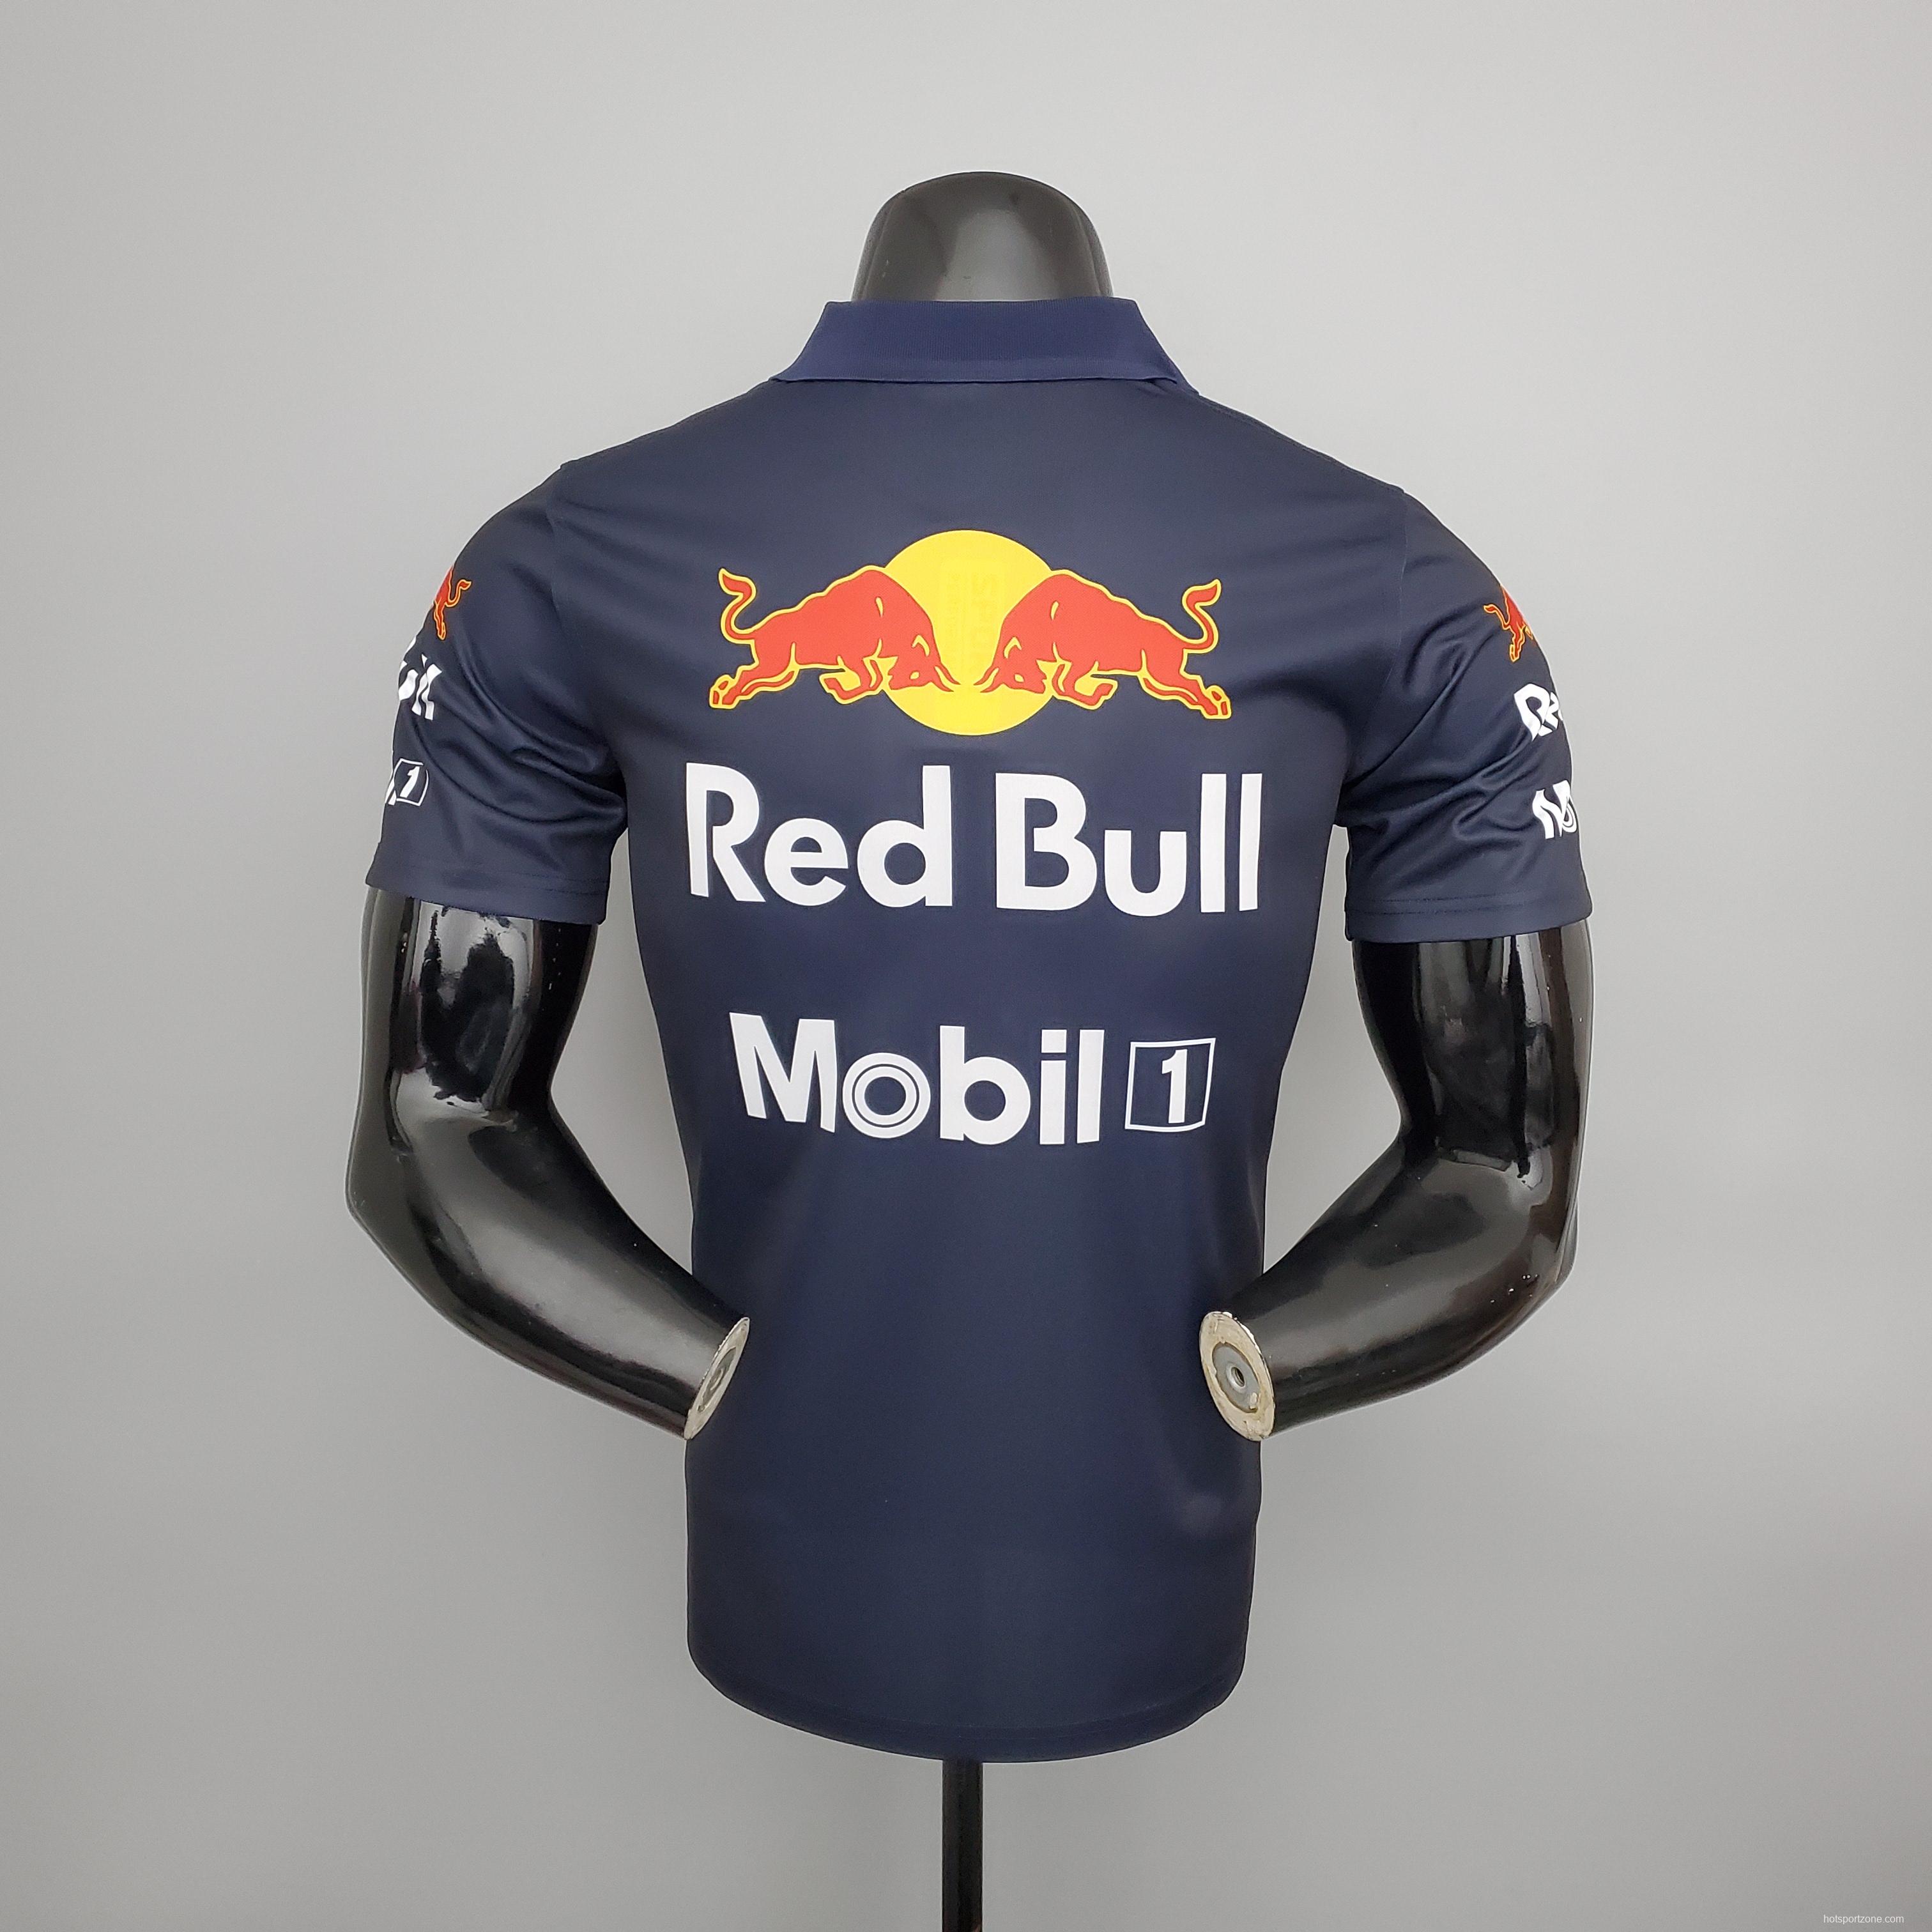 F1 Formula One; Red Bull Racing Suit; Royal Blue s-5xl